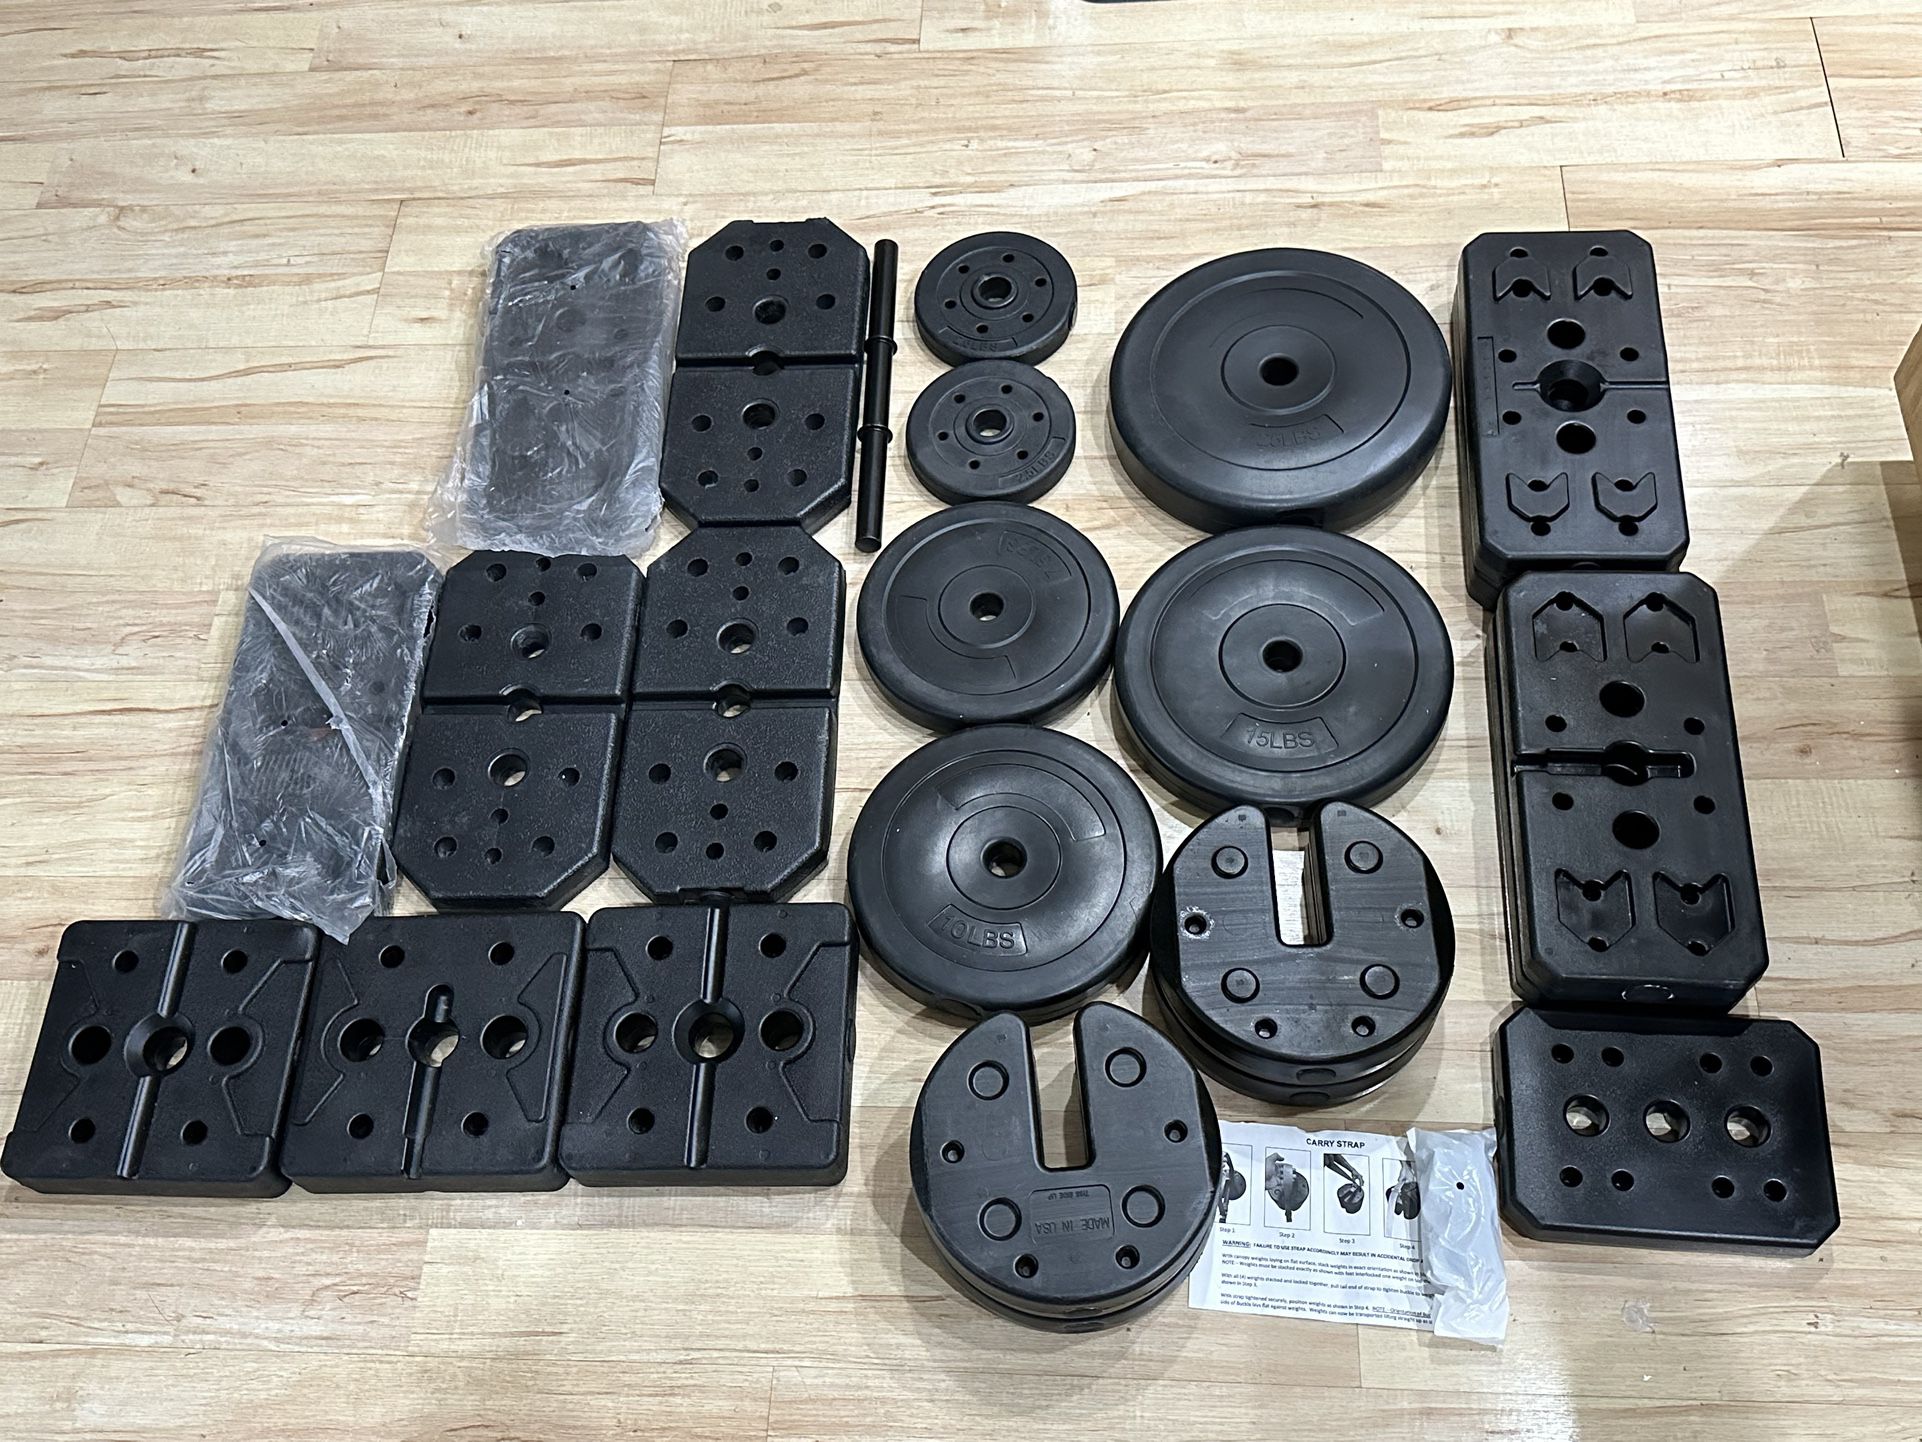 New Replacement Weights & Weight Plates for Exercise Equipment Gym Lifting